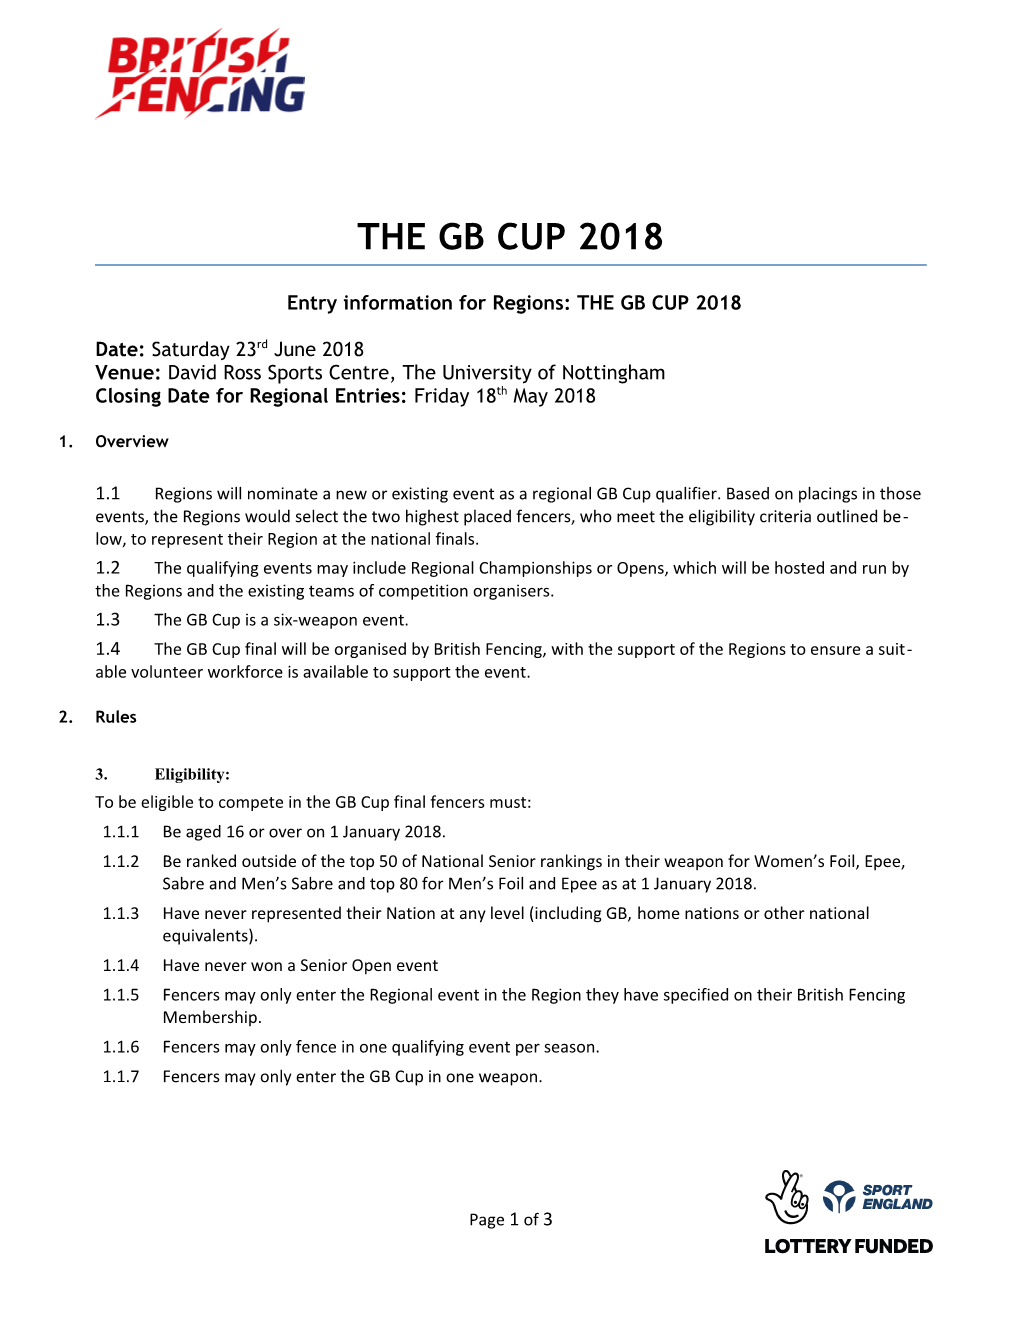 Entry Information for Regions: the GB CUP 2018